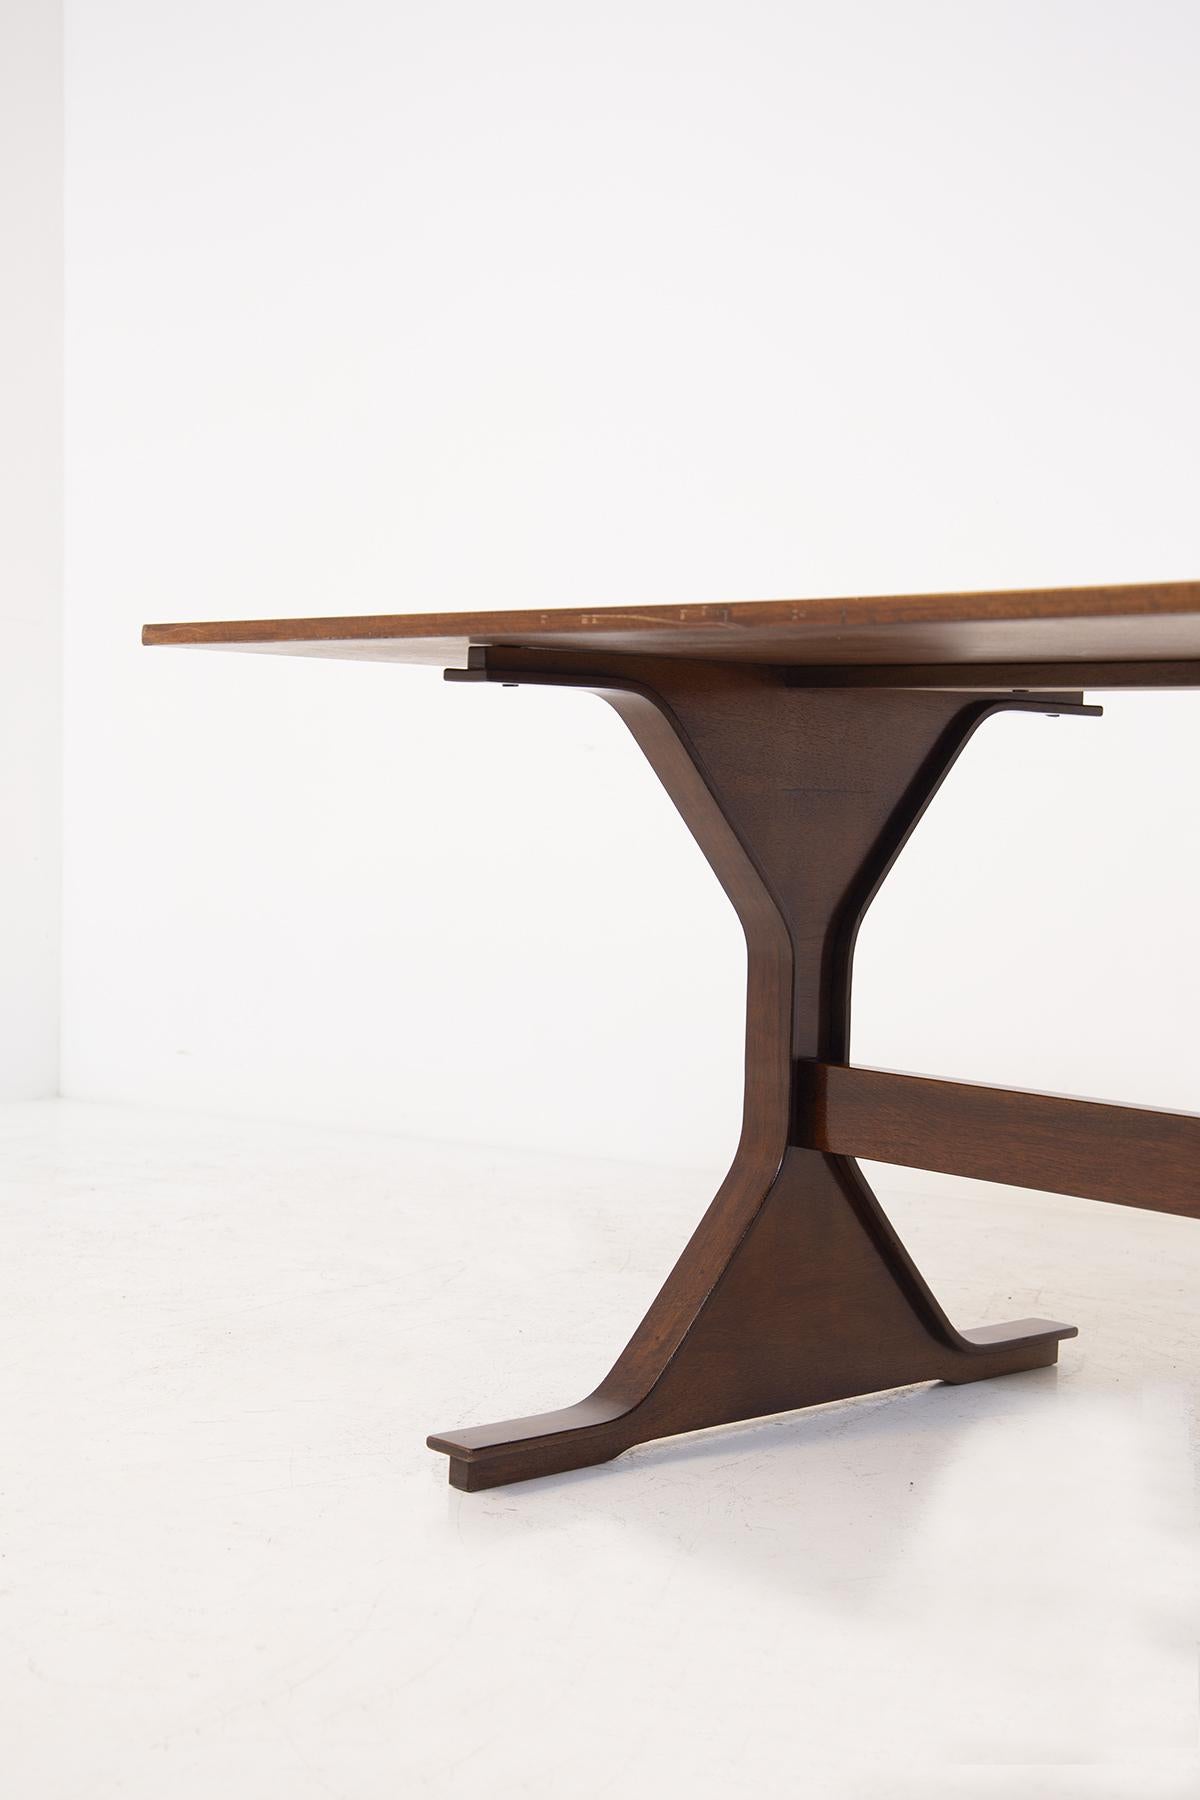 Dining table model 522 produced for Bernini by the designer Gianfranco Frattini in the 1960s. This design table is completely made of walnut, the top is perfectly rectangular and suitable for 6 to 8 diners. The elaborate and characteristic side